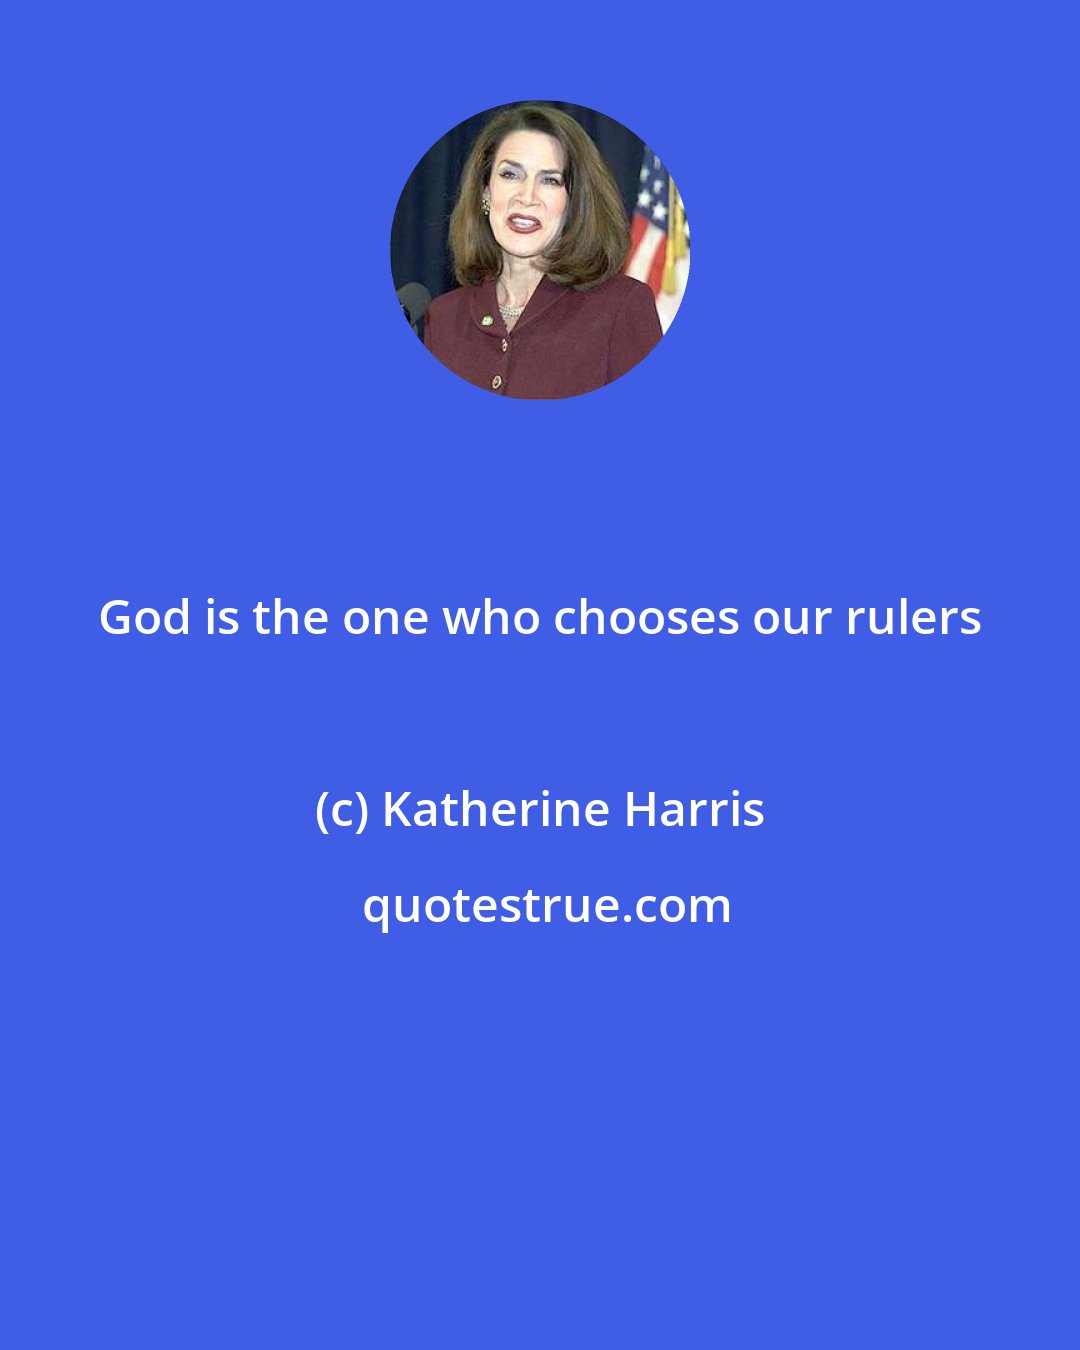 Katherine Harris: God is the one who chooses our rulers